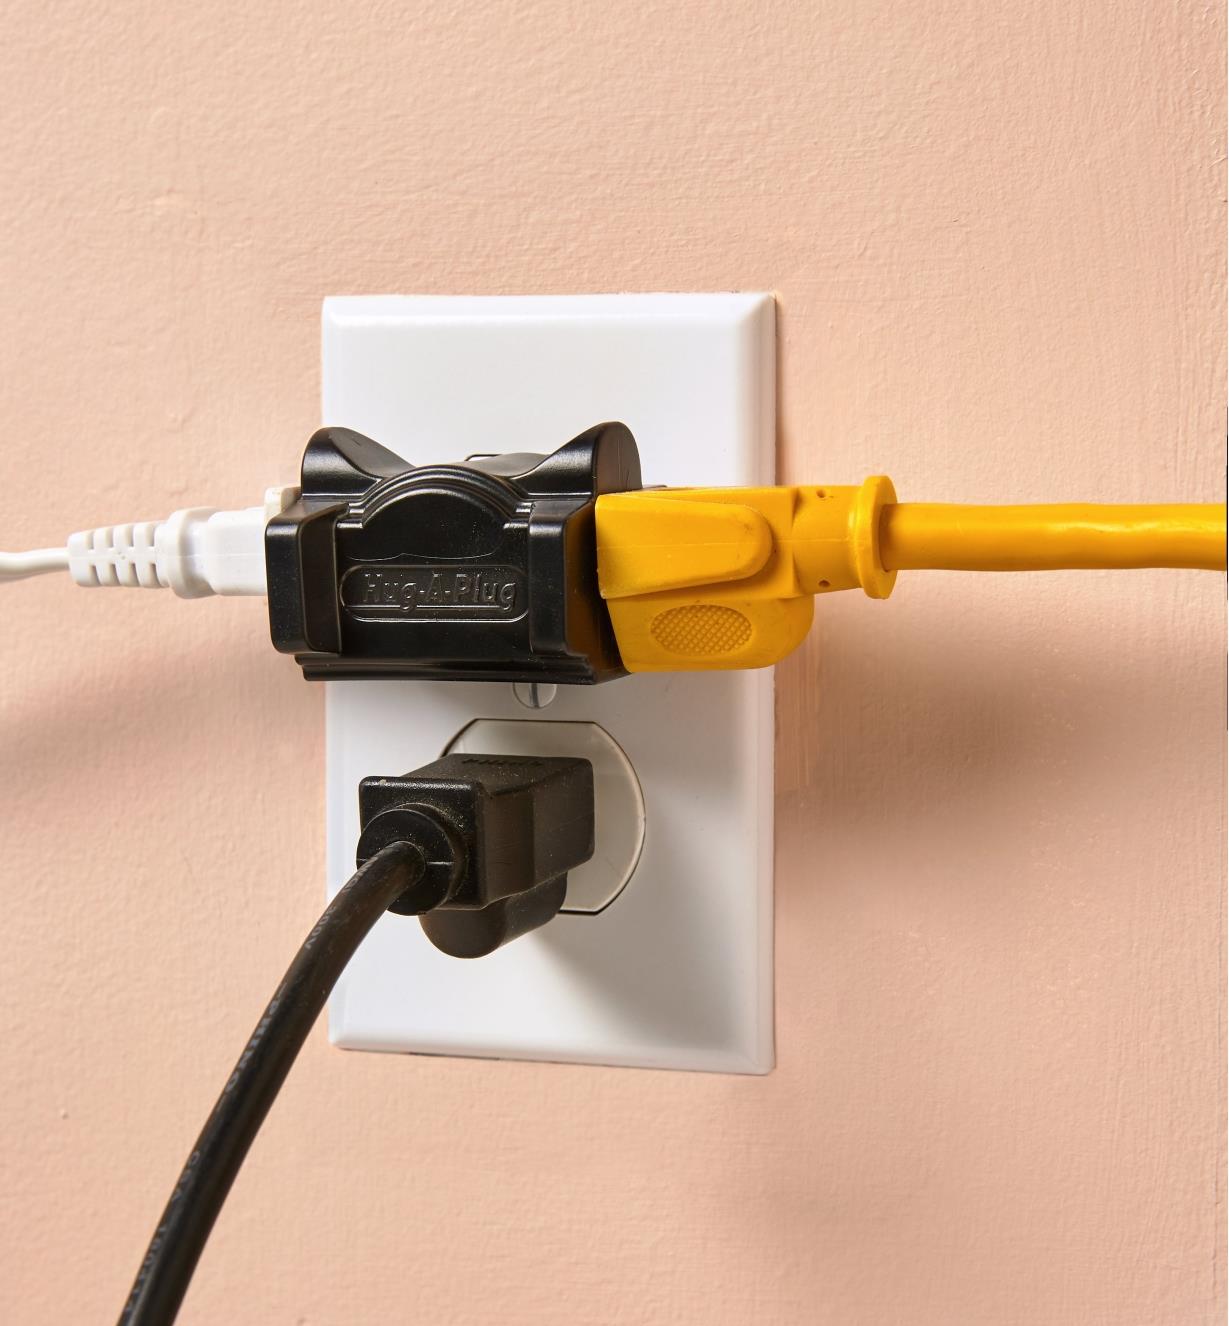 Black Hug-A-Plug adapter, with two plugs attached, plugged into a wall outlet 